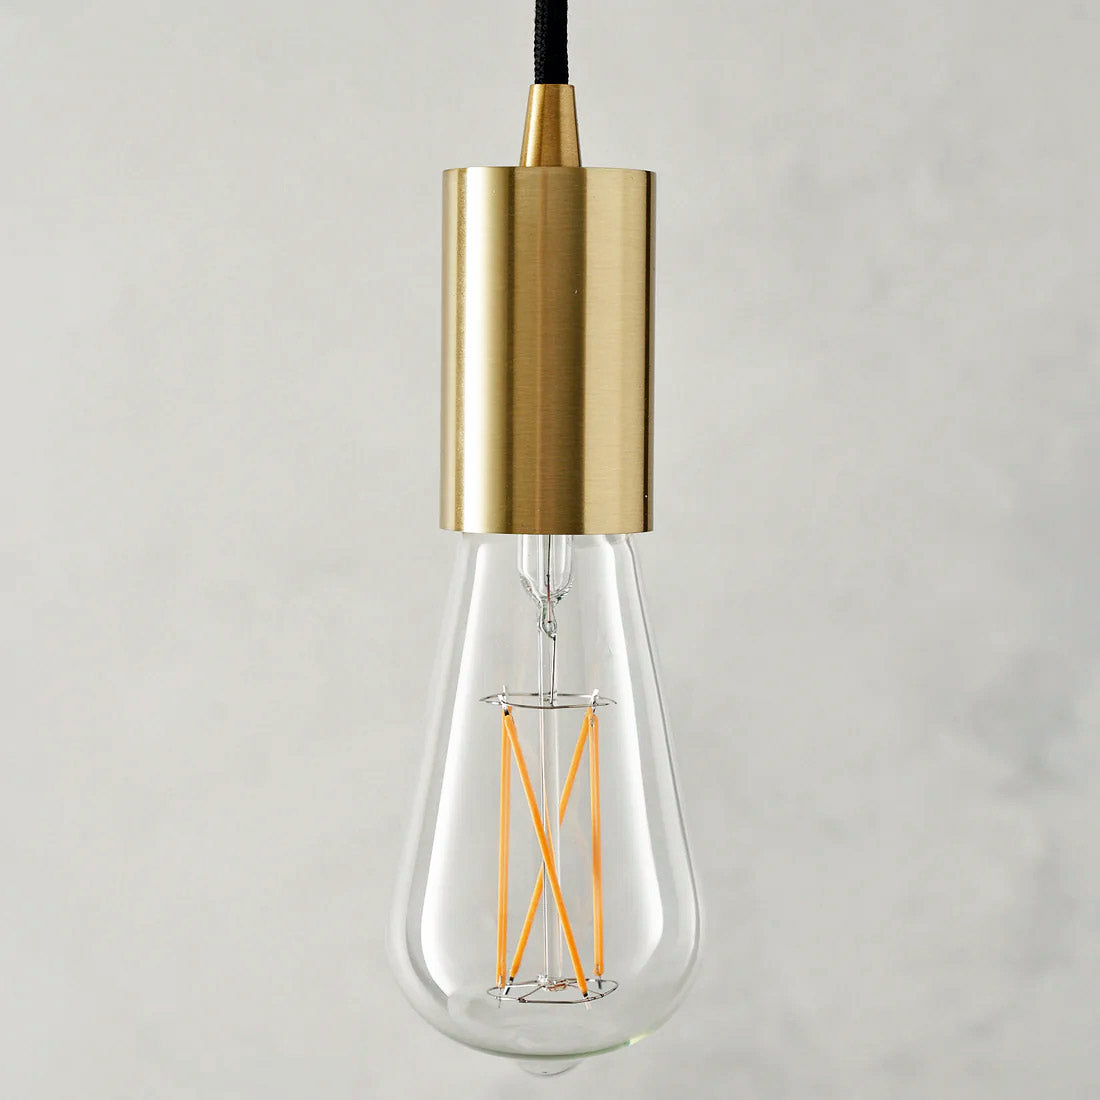 The Well Lit Leo classic LED light bulb is pictured with a Well Lit Spin Pendant Light in Brass and sold by South Charlotte Fine Lighting